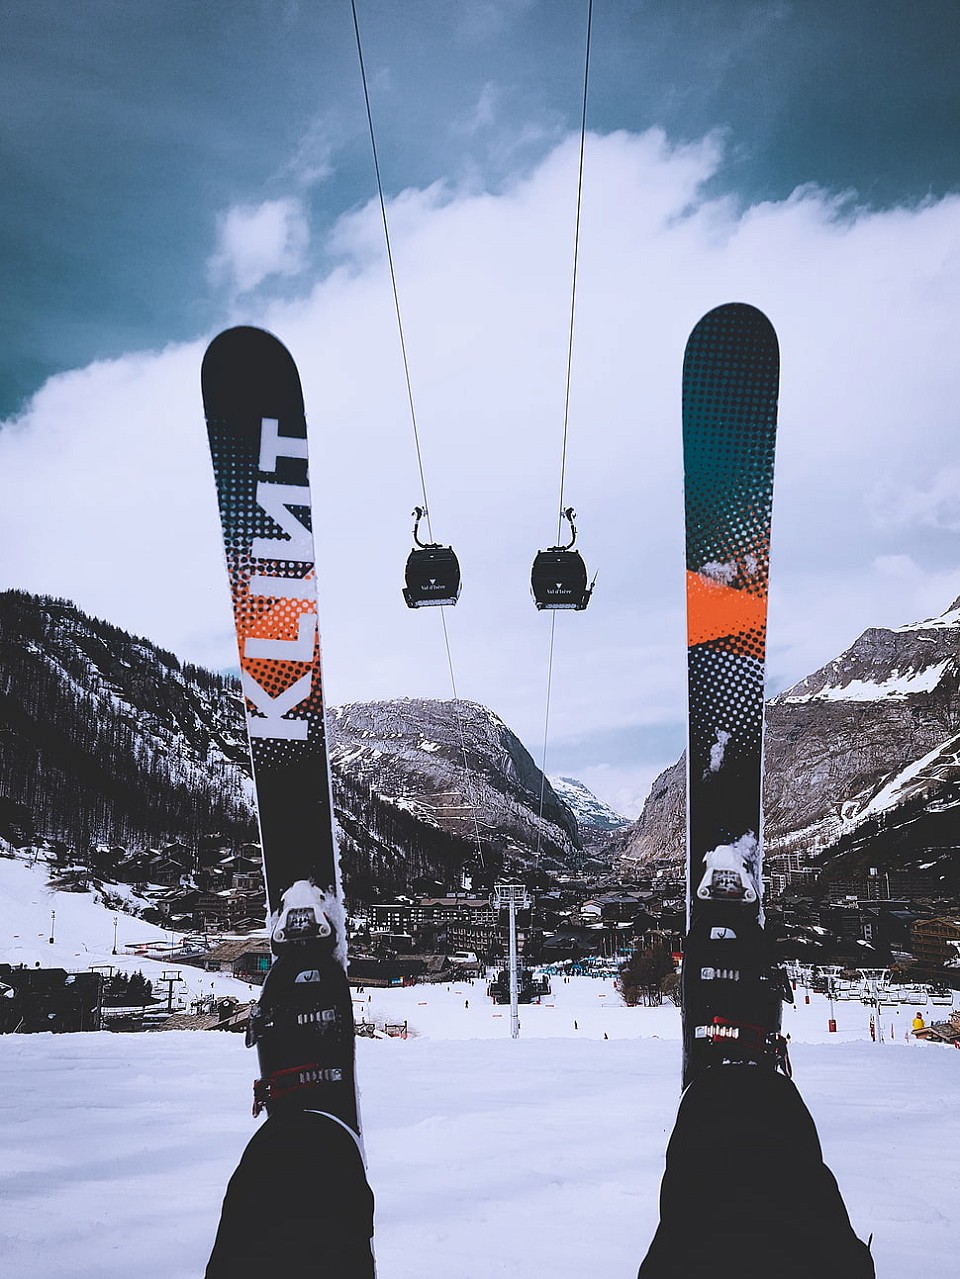 A pair of skis raised in the air, in the background is a ski lift, mountains and clear blue sky